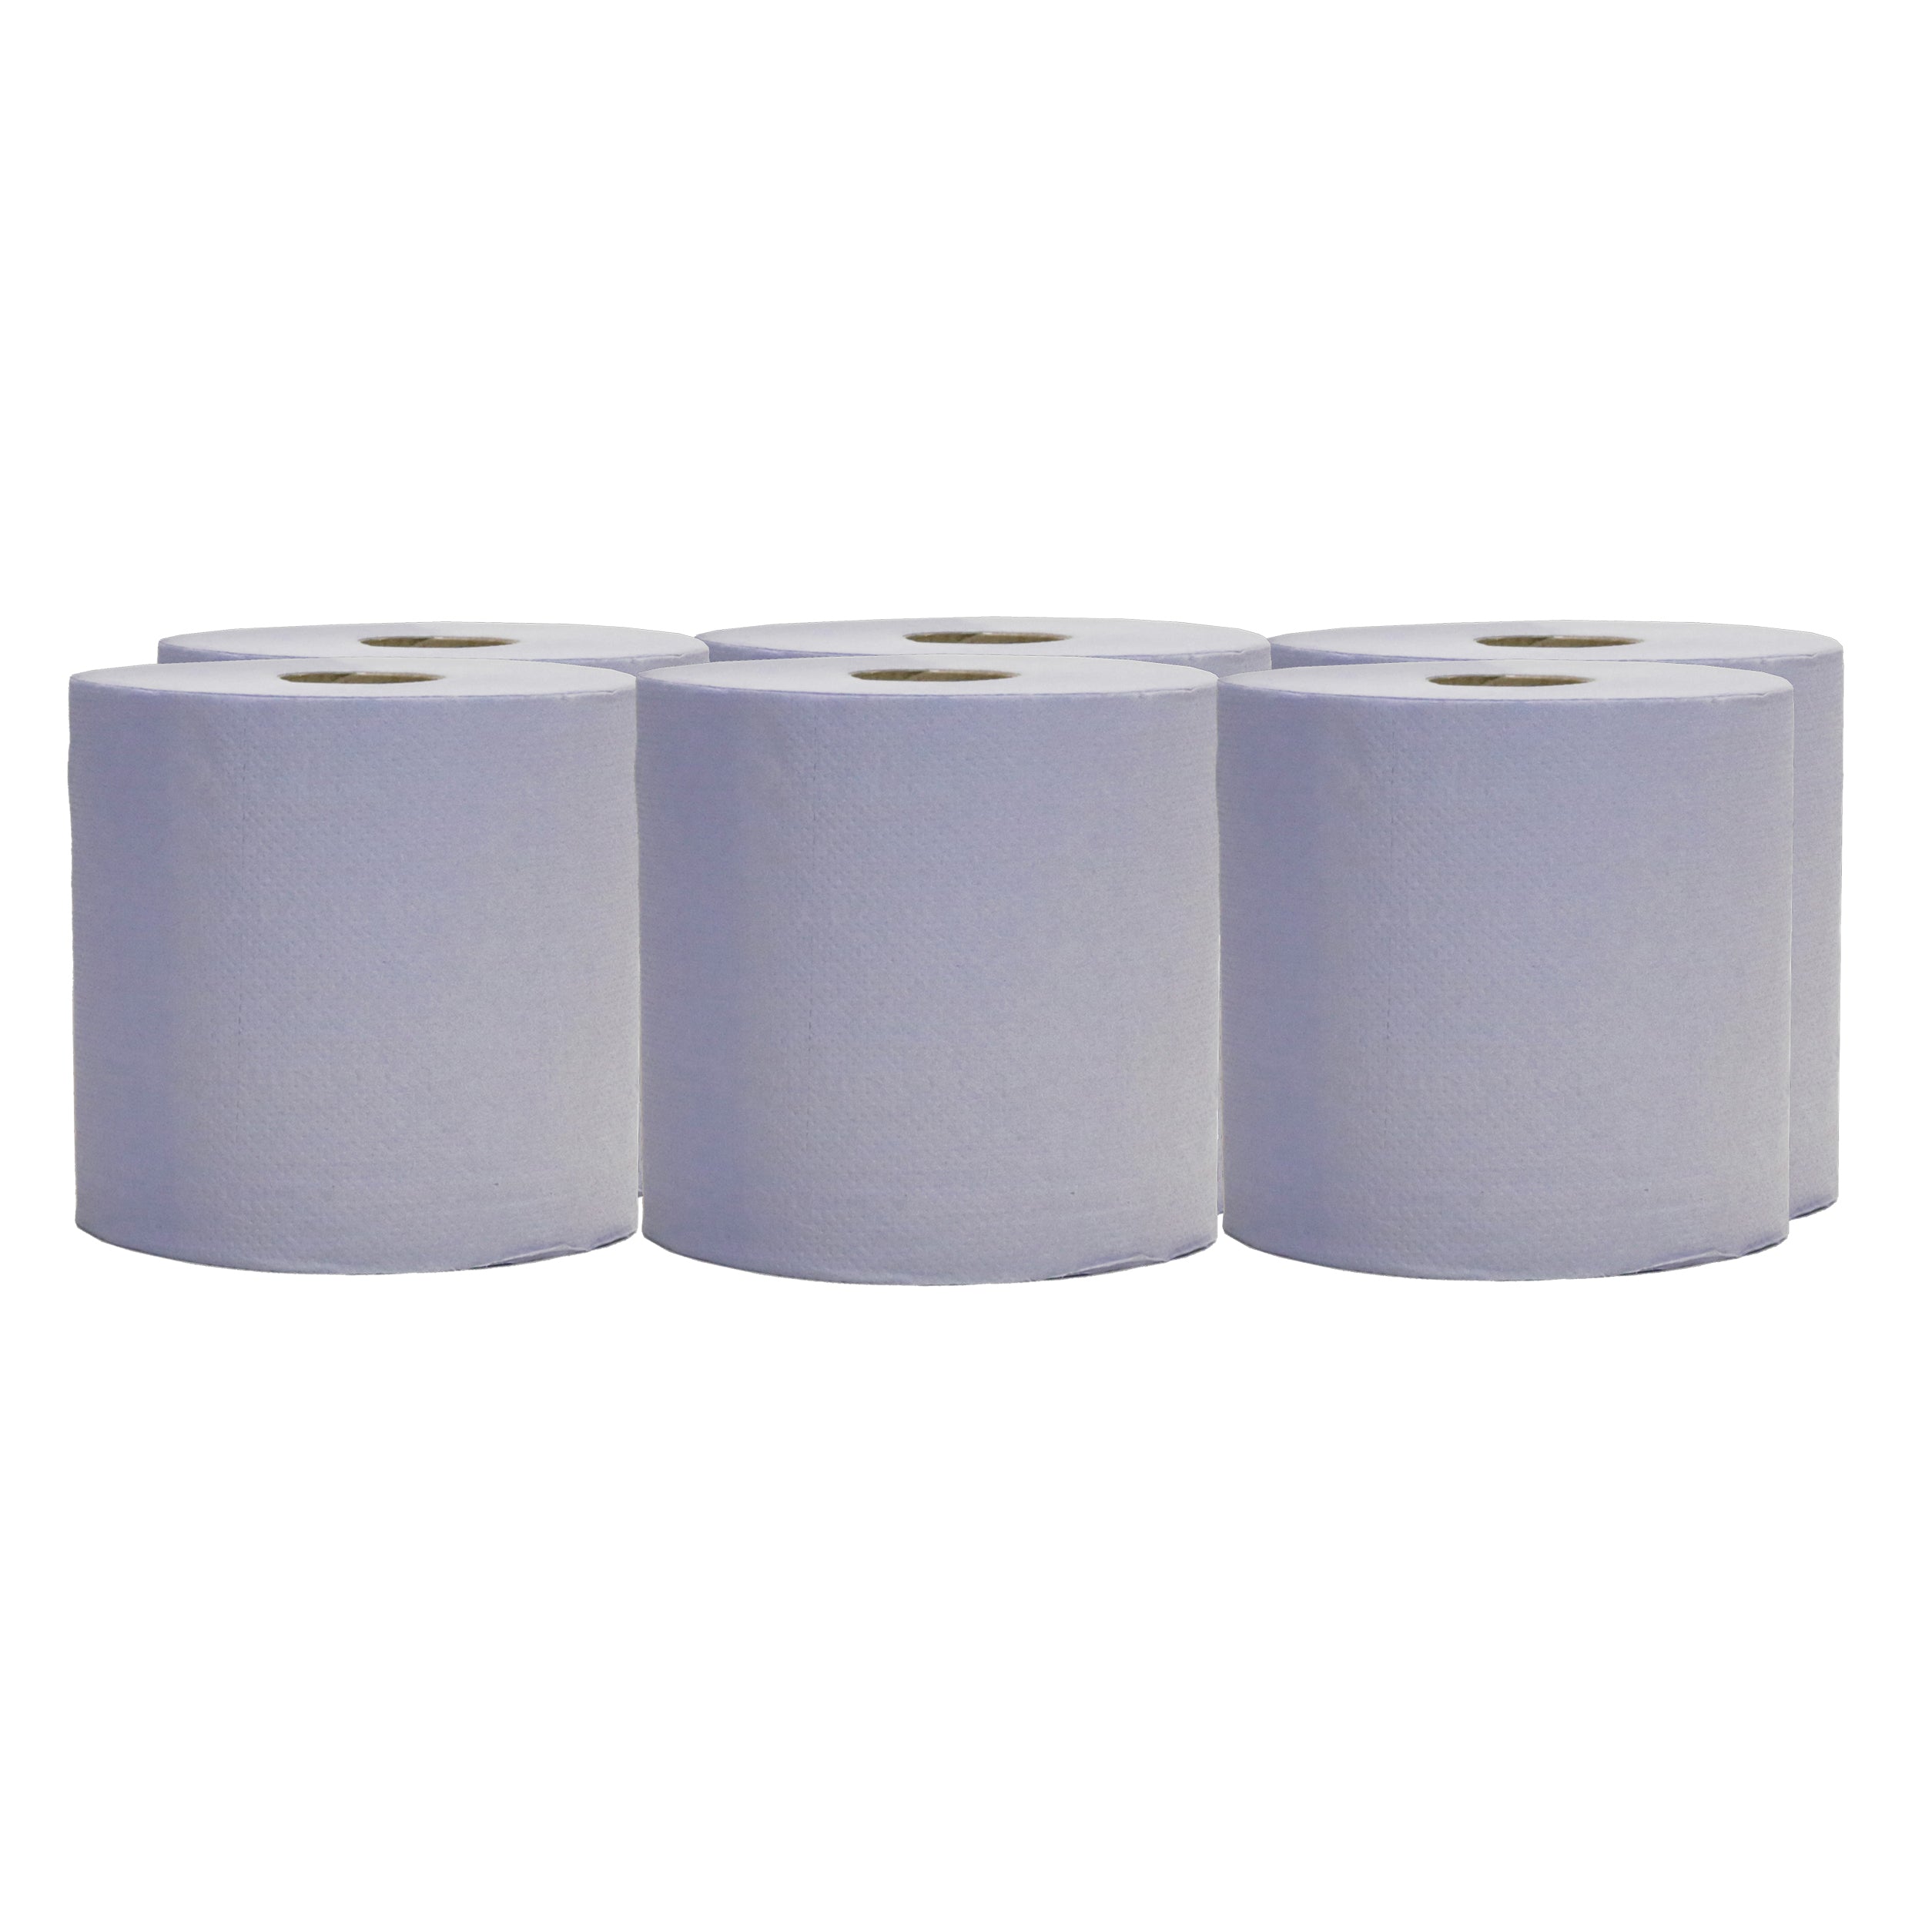 2 Ply Embossed Centrefeed Blue Wiper Roll x 6